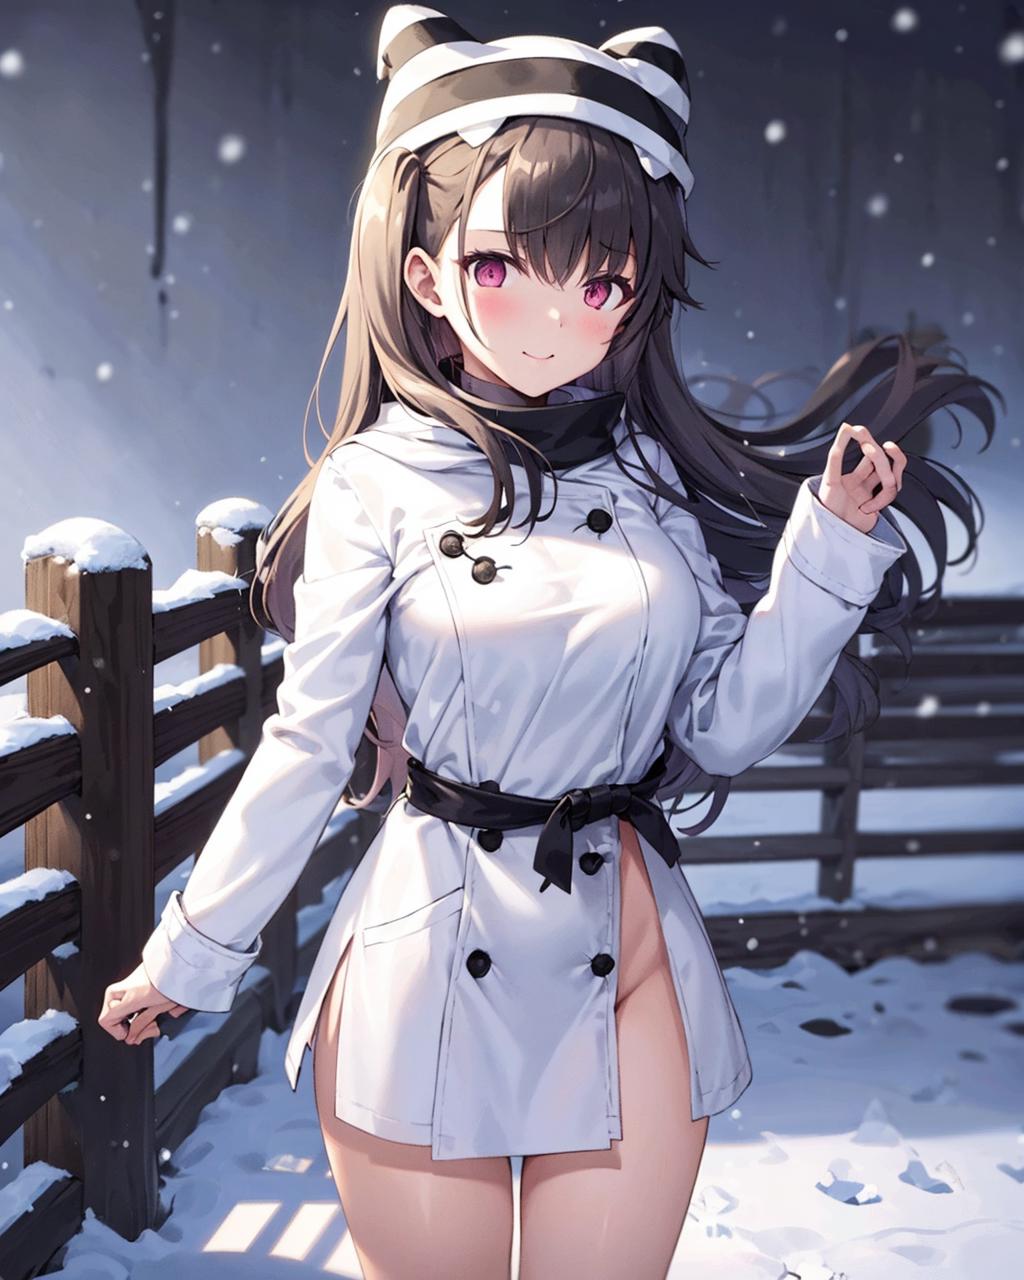 pen illustration sketch anime girl with long hair and a winter jacket that  is open and half-shot